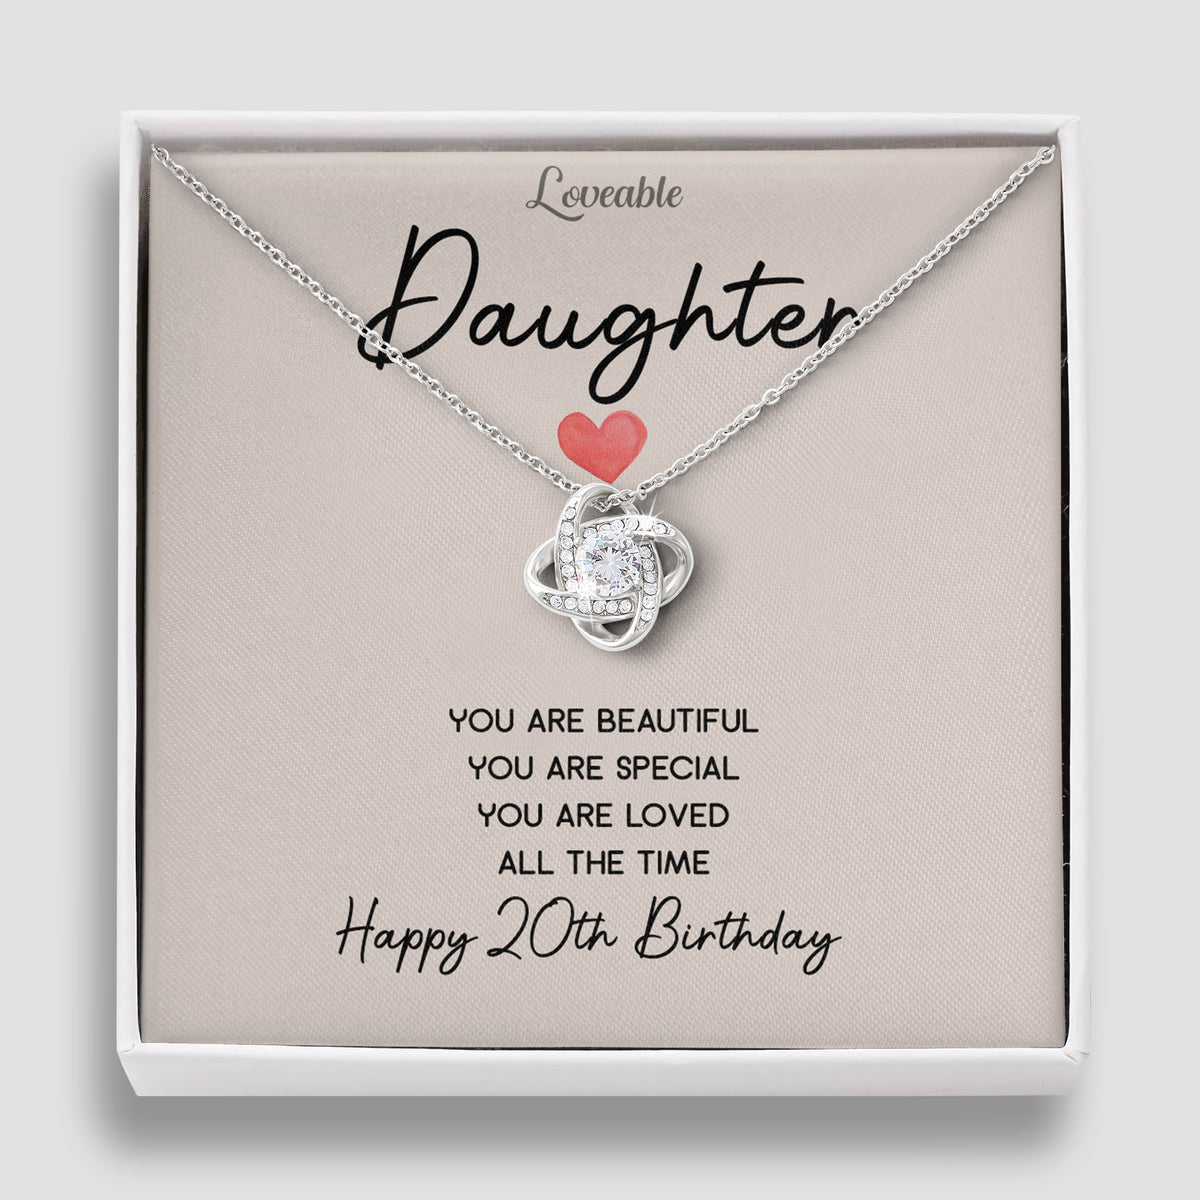 Daughter, You Are Beautiful, Special, Loved, All The Time Necklace - 20th Birthday Gift for Daughter